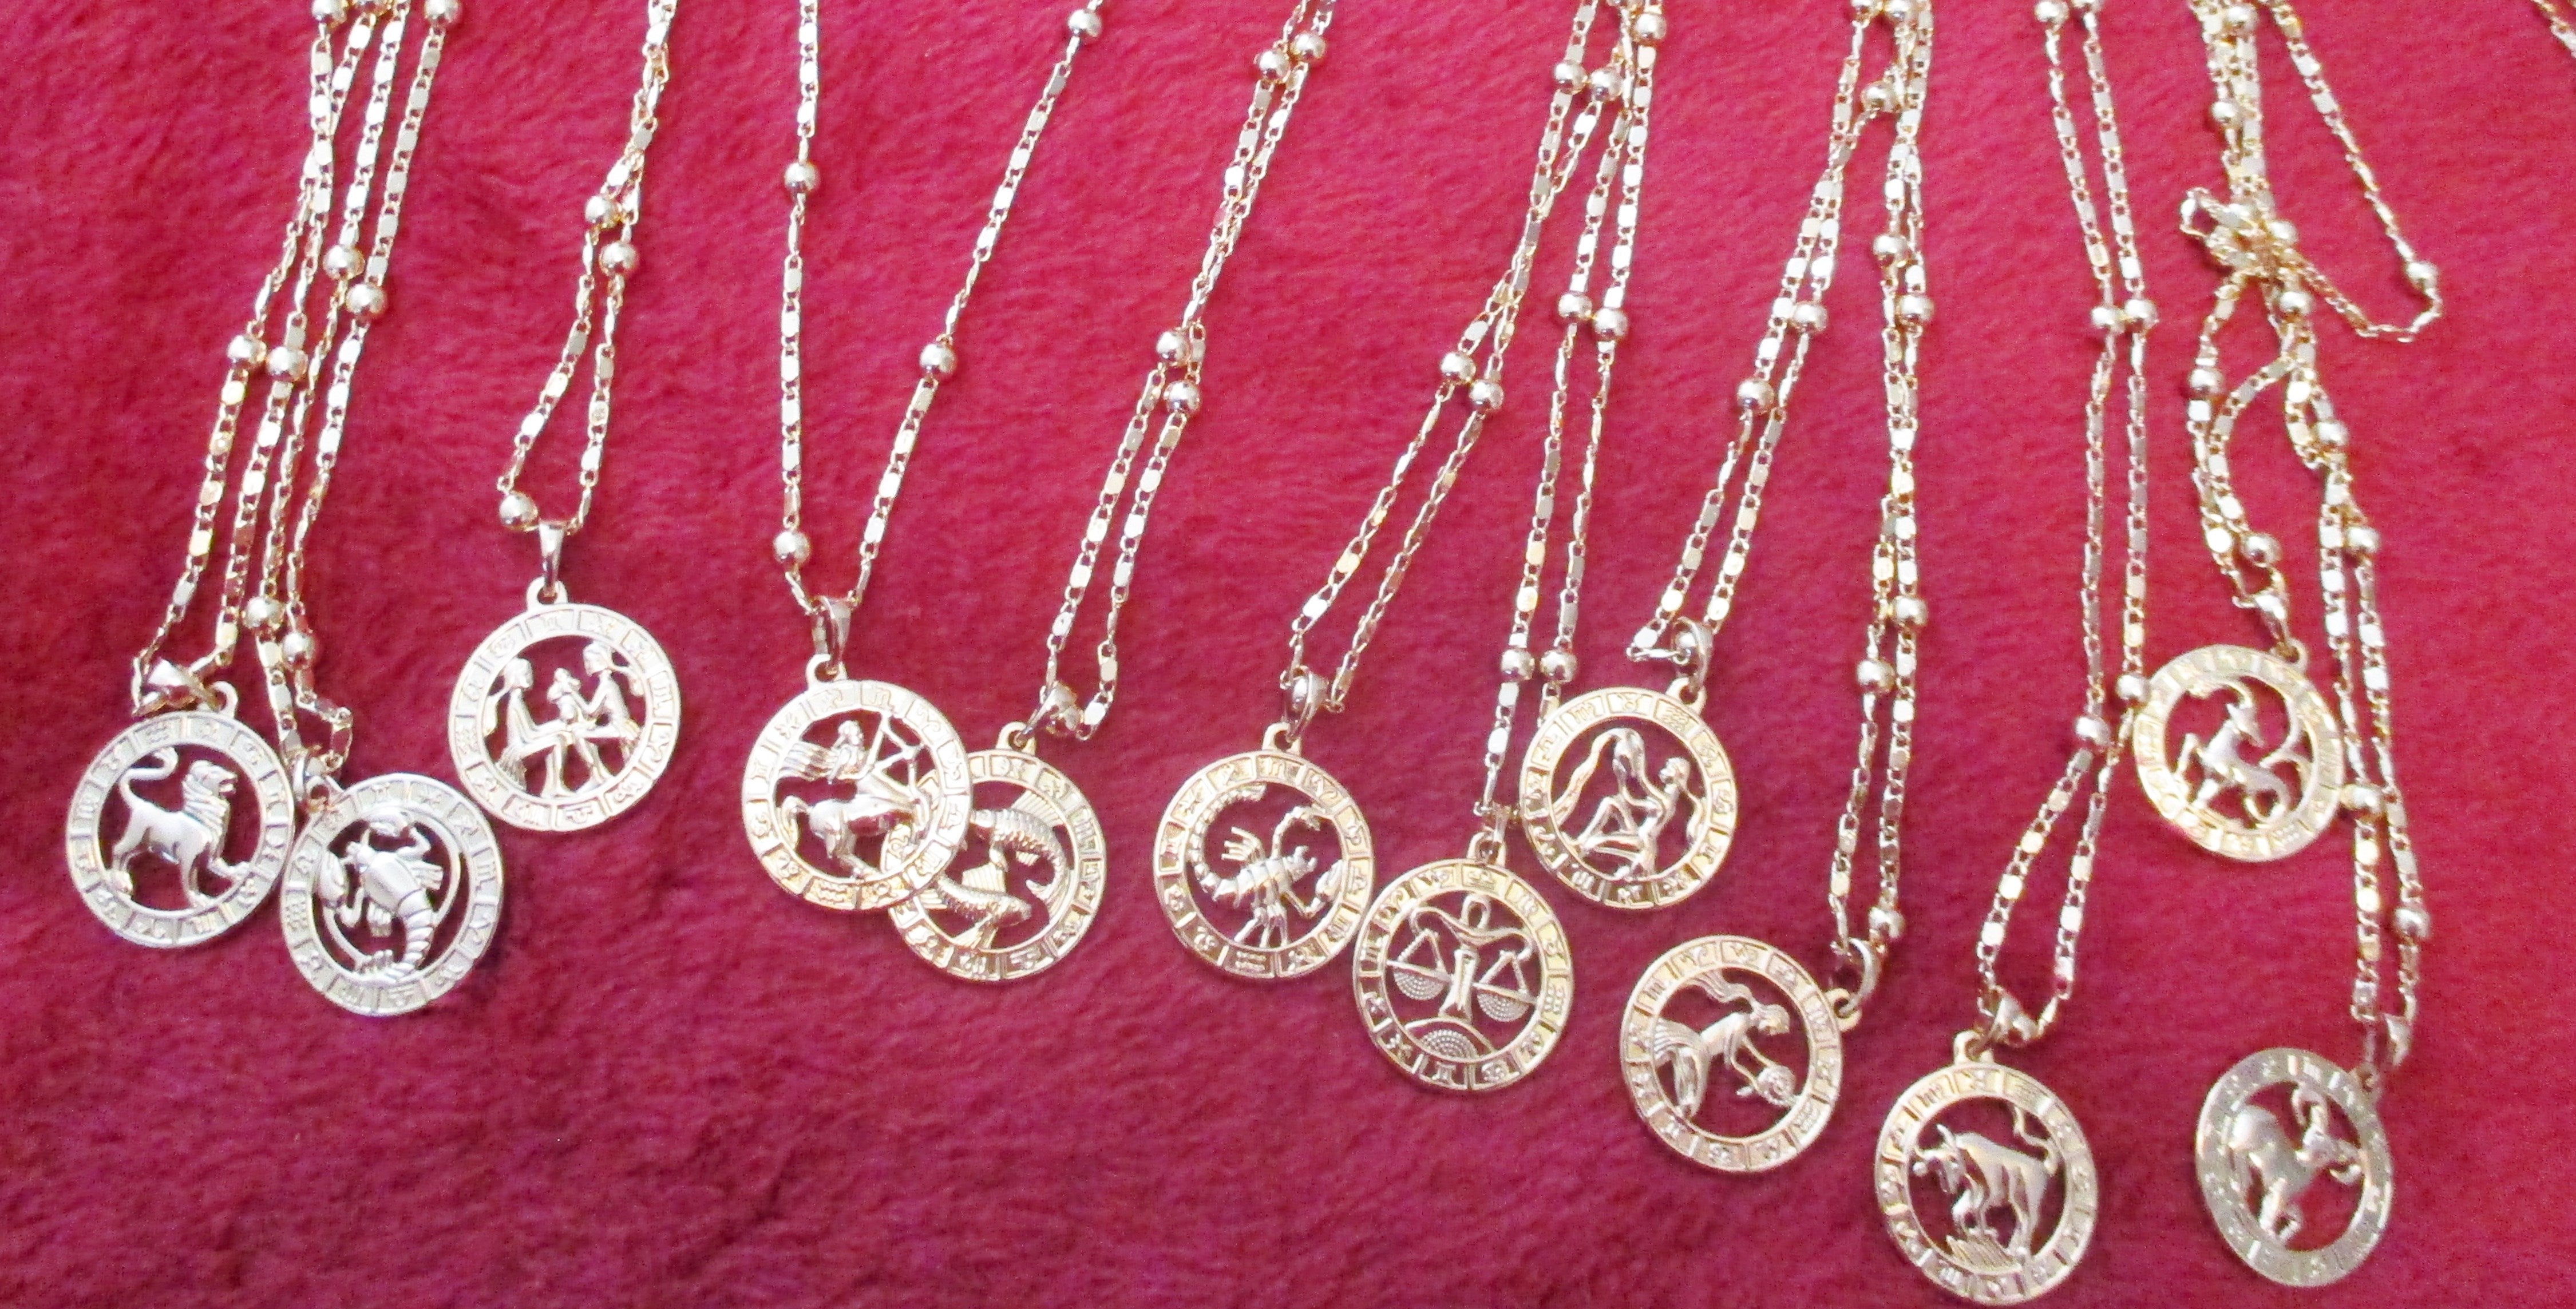 Zodiac Necklace SALE From: $$$ to  $22.99